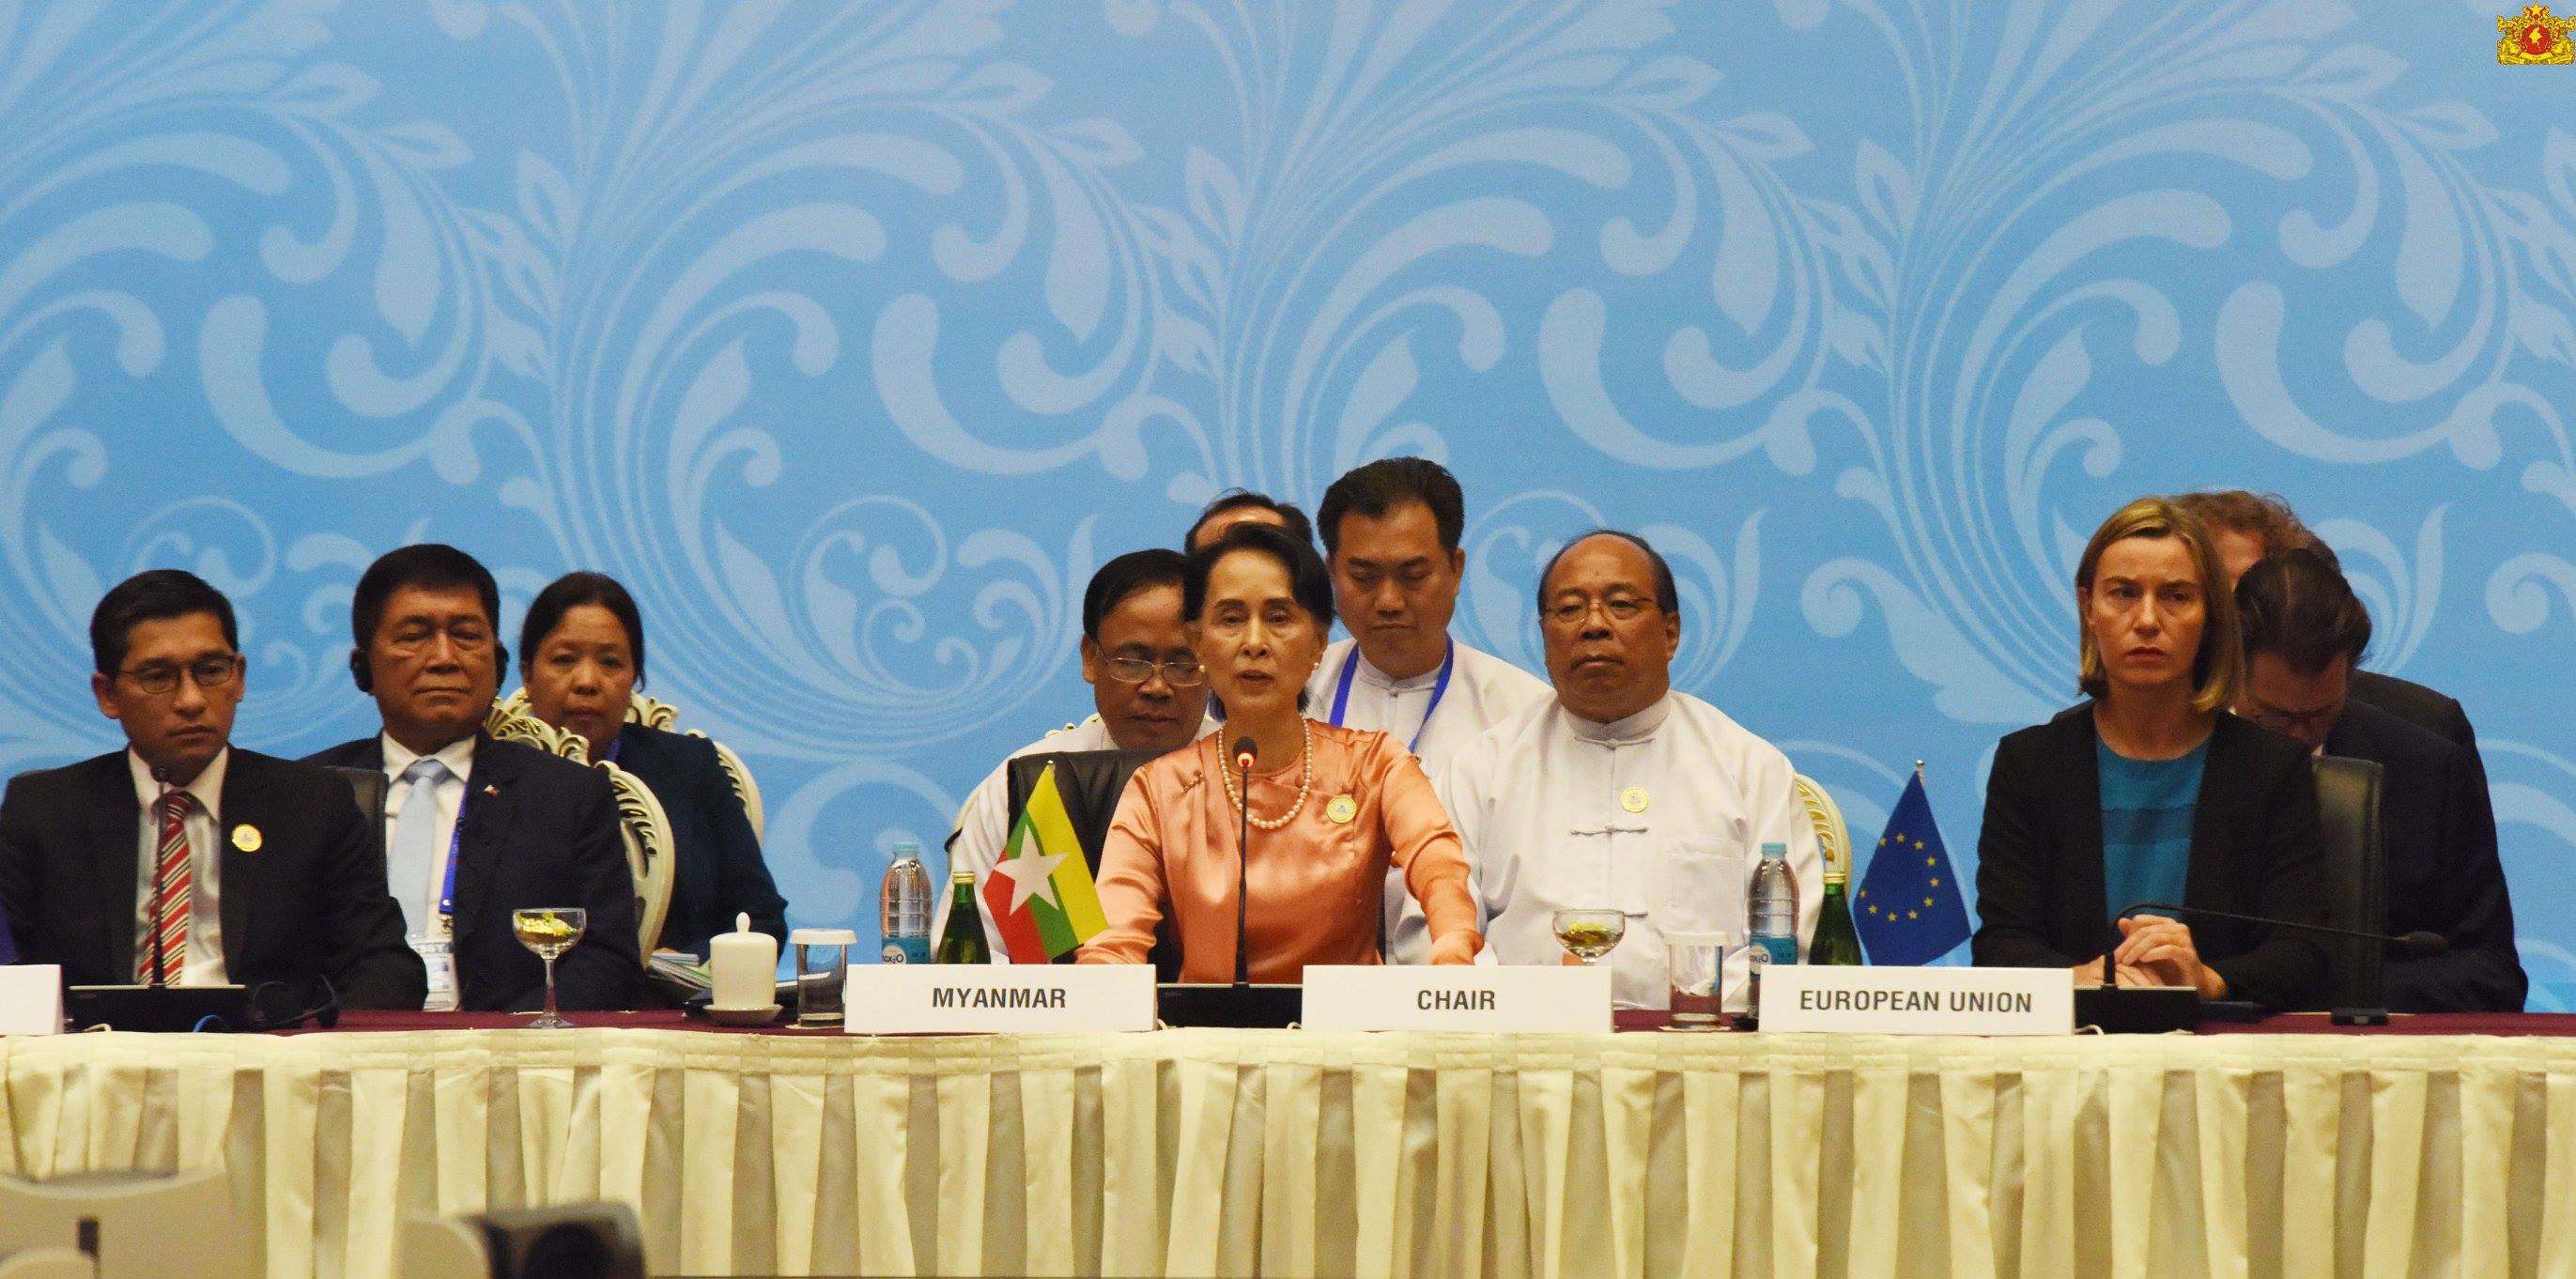 Aung San Suu Kyi sits beside Federica Mogherini, the EU High Representative for Foreign Affairs, at the Asia-Europe Foreign Ministers’ Meeting in Naypyidaw on November 20, 2017. Photo: Facebook / Office of the State Counsellor